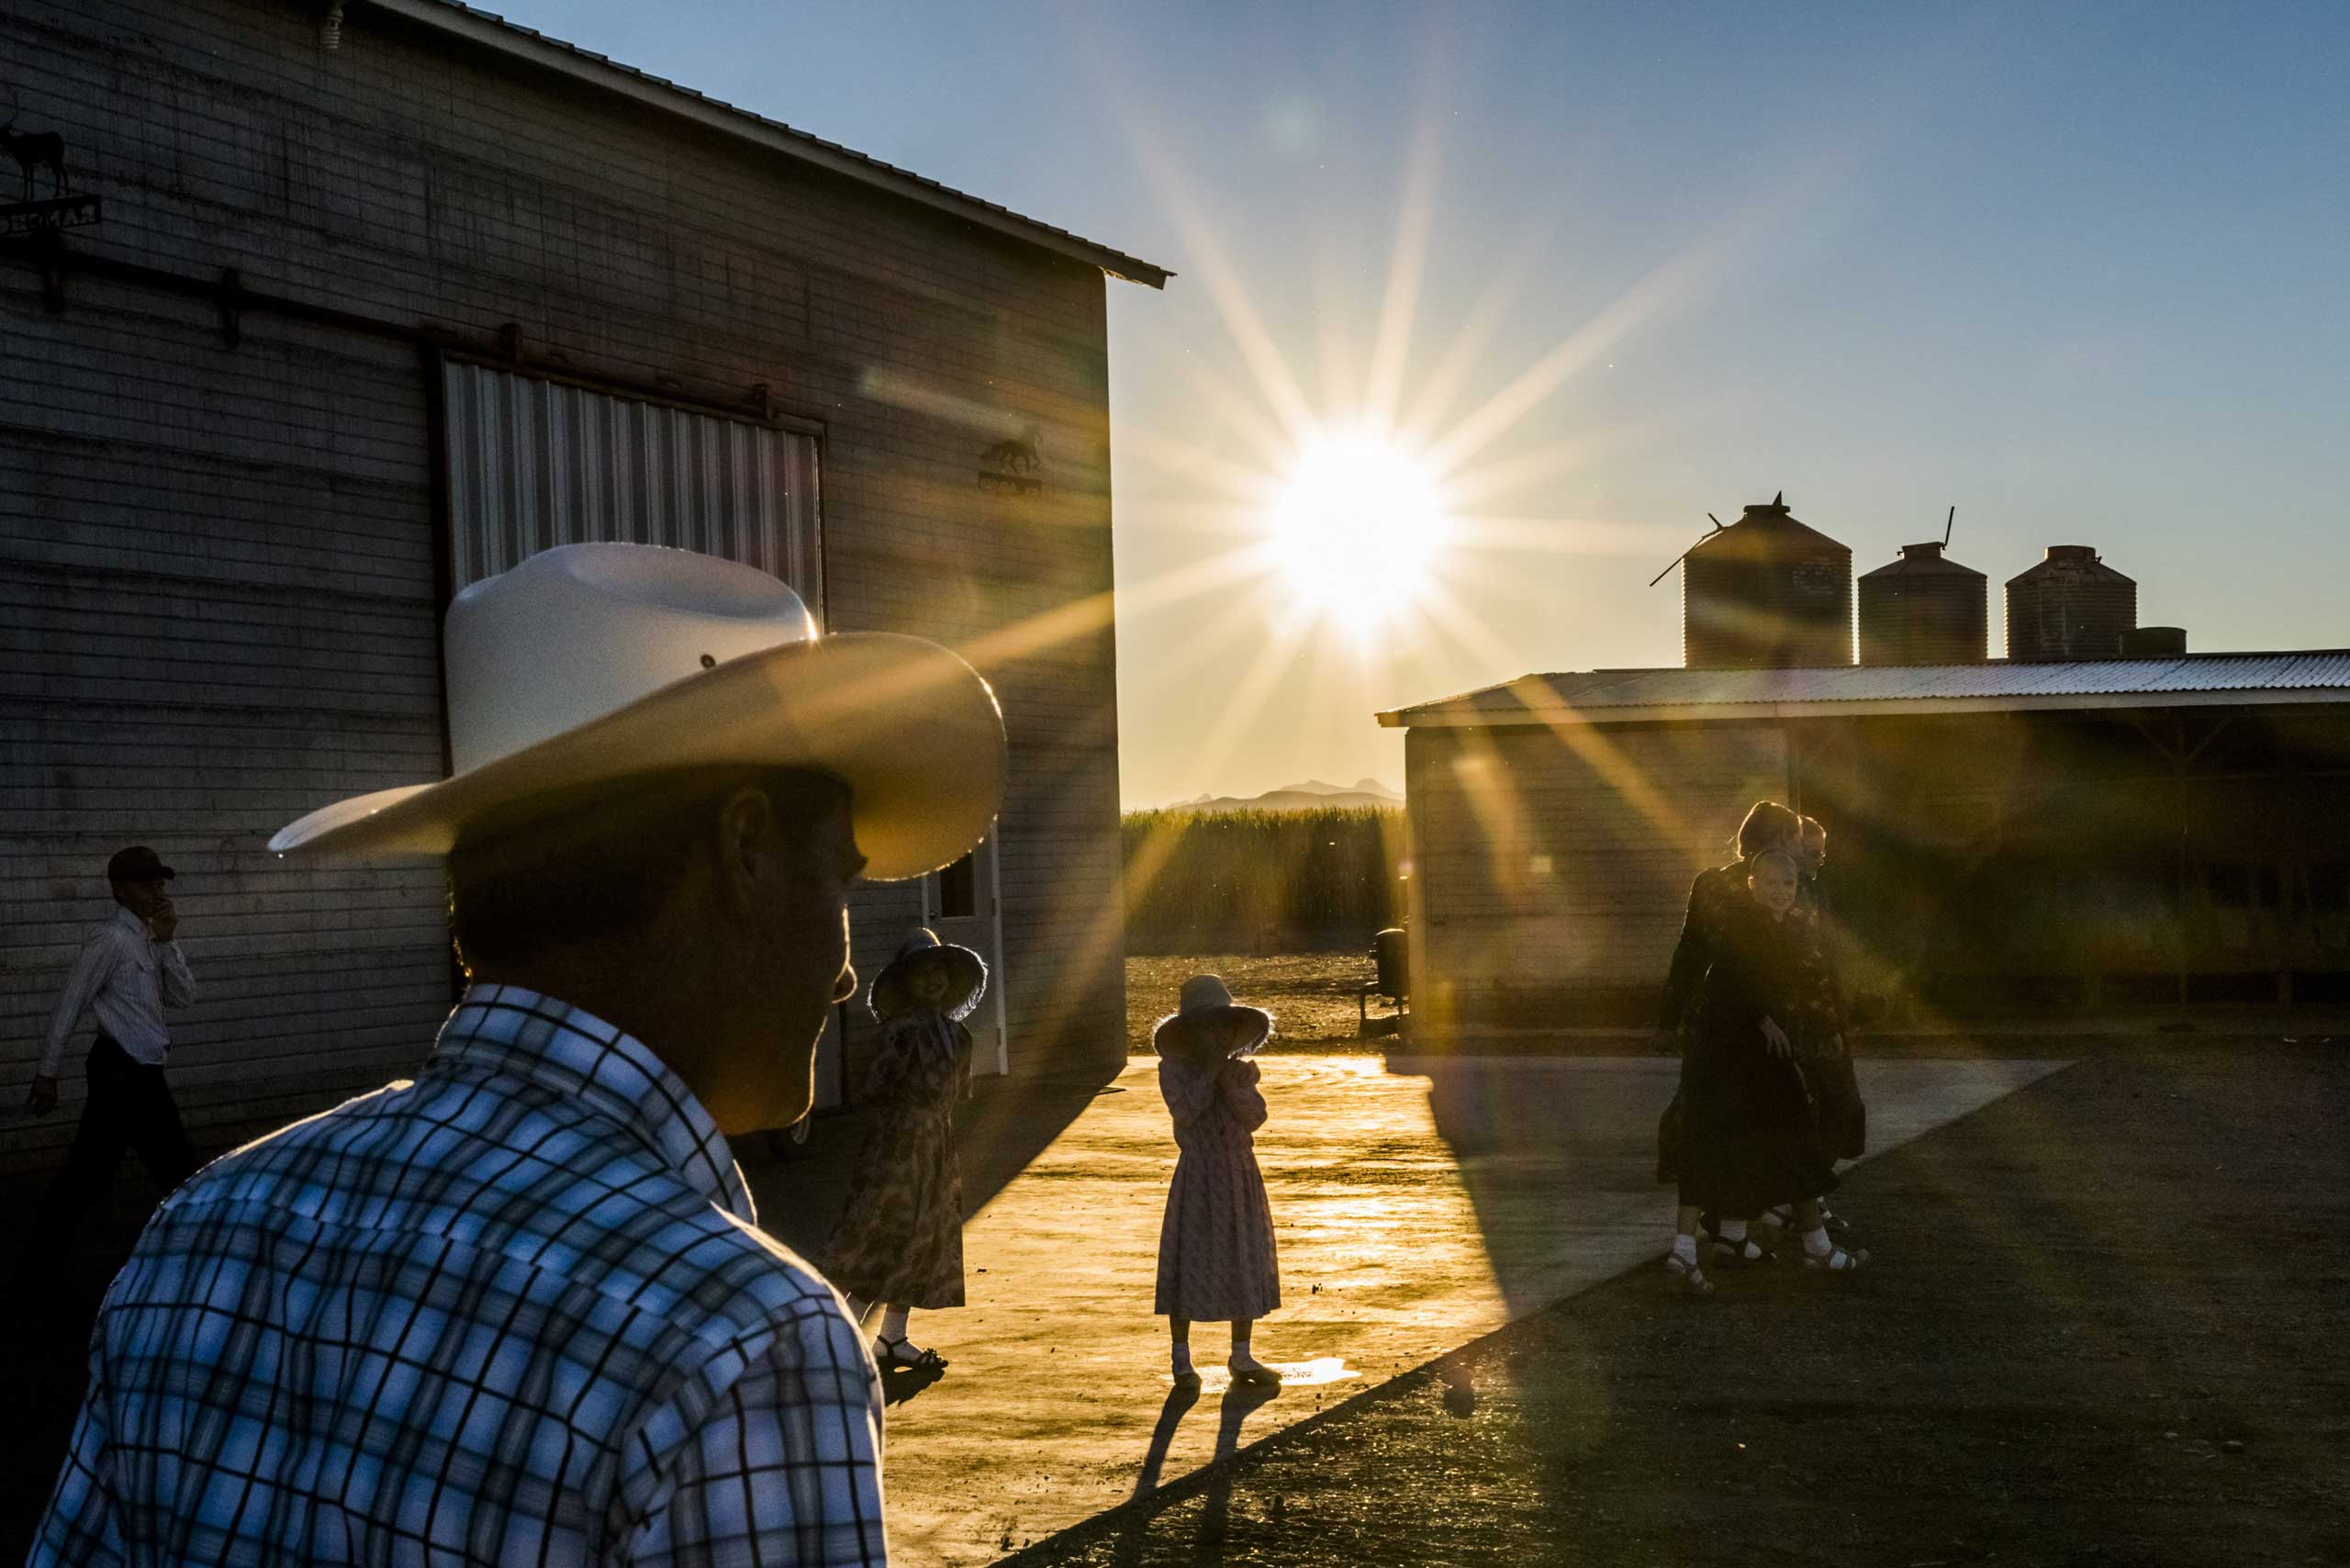 The New York Times: In Mexico, Mennonite Farmers Struggle With Water ShortageMennonite children played recently at a family farm in Capulín, Mexico. Hundreds of Mennonites plan to leave Mexico for other colonies in other countries, where land is cheaper and water is more plentiful.